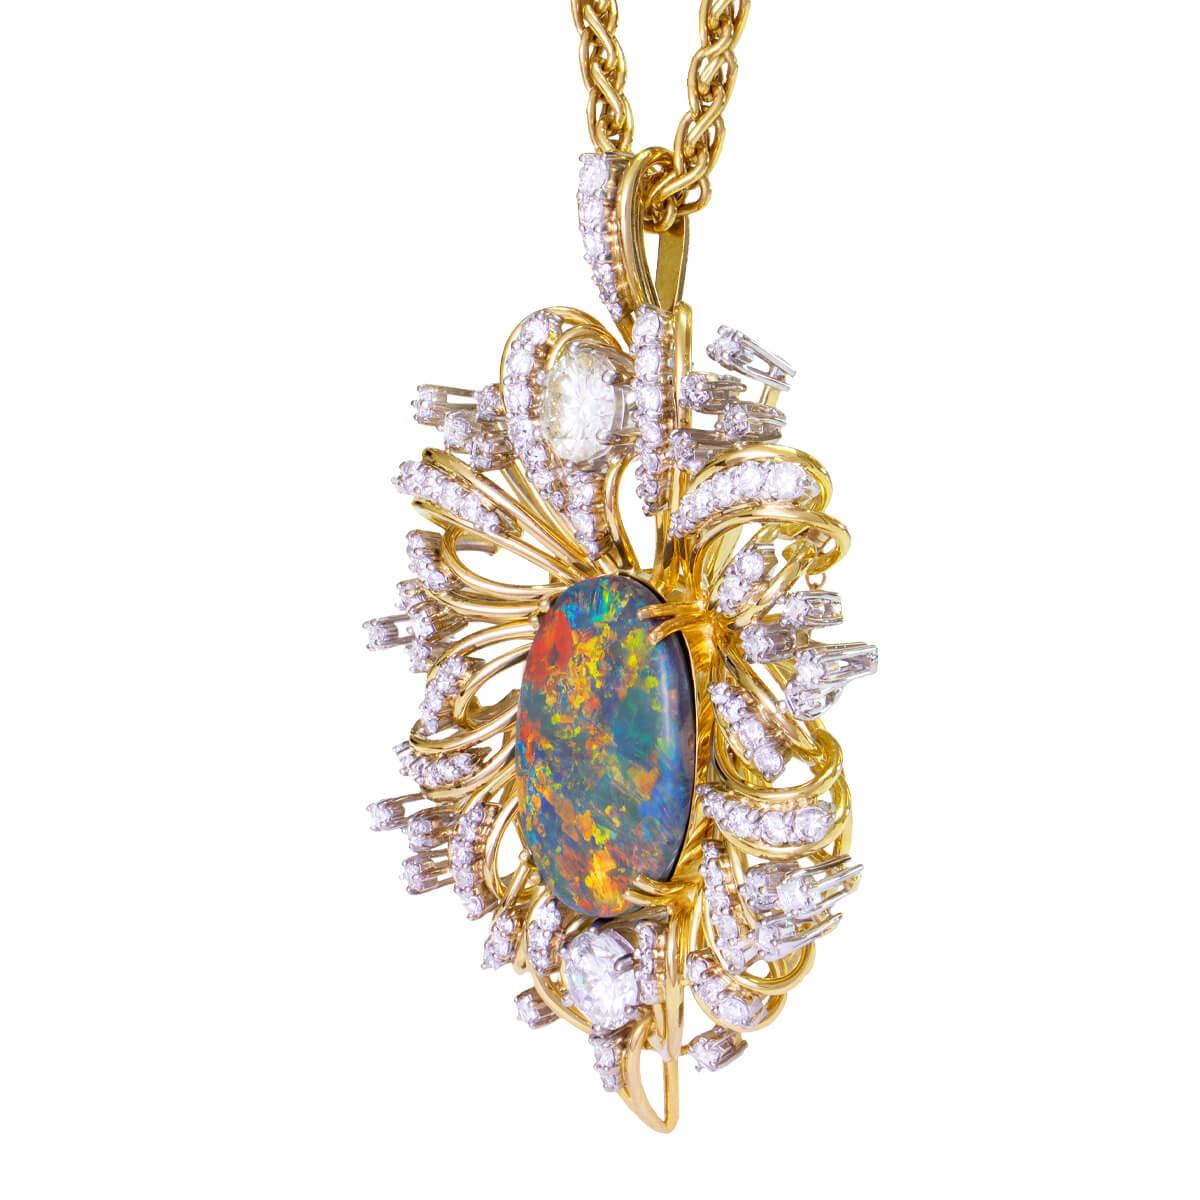 A truly timeless piece, the Opal Blossom, was created in the 1930s. This spectacular piece is a pendant and also a brooch. Centred with a heart of 17.7ct black opal and set in an 18K gold and palladium Chrysanthemum setting featuring over 8ct of